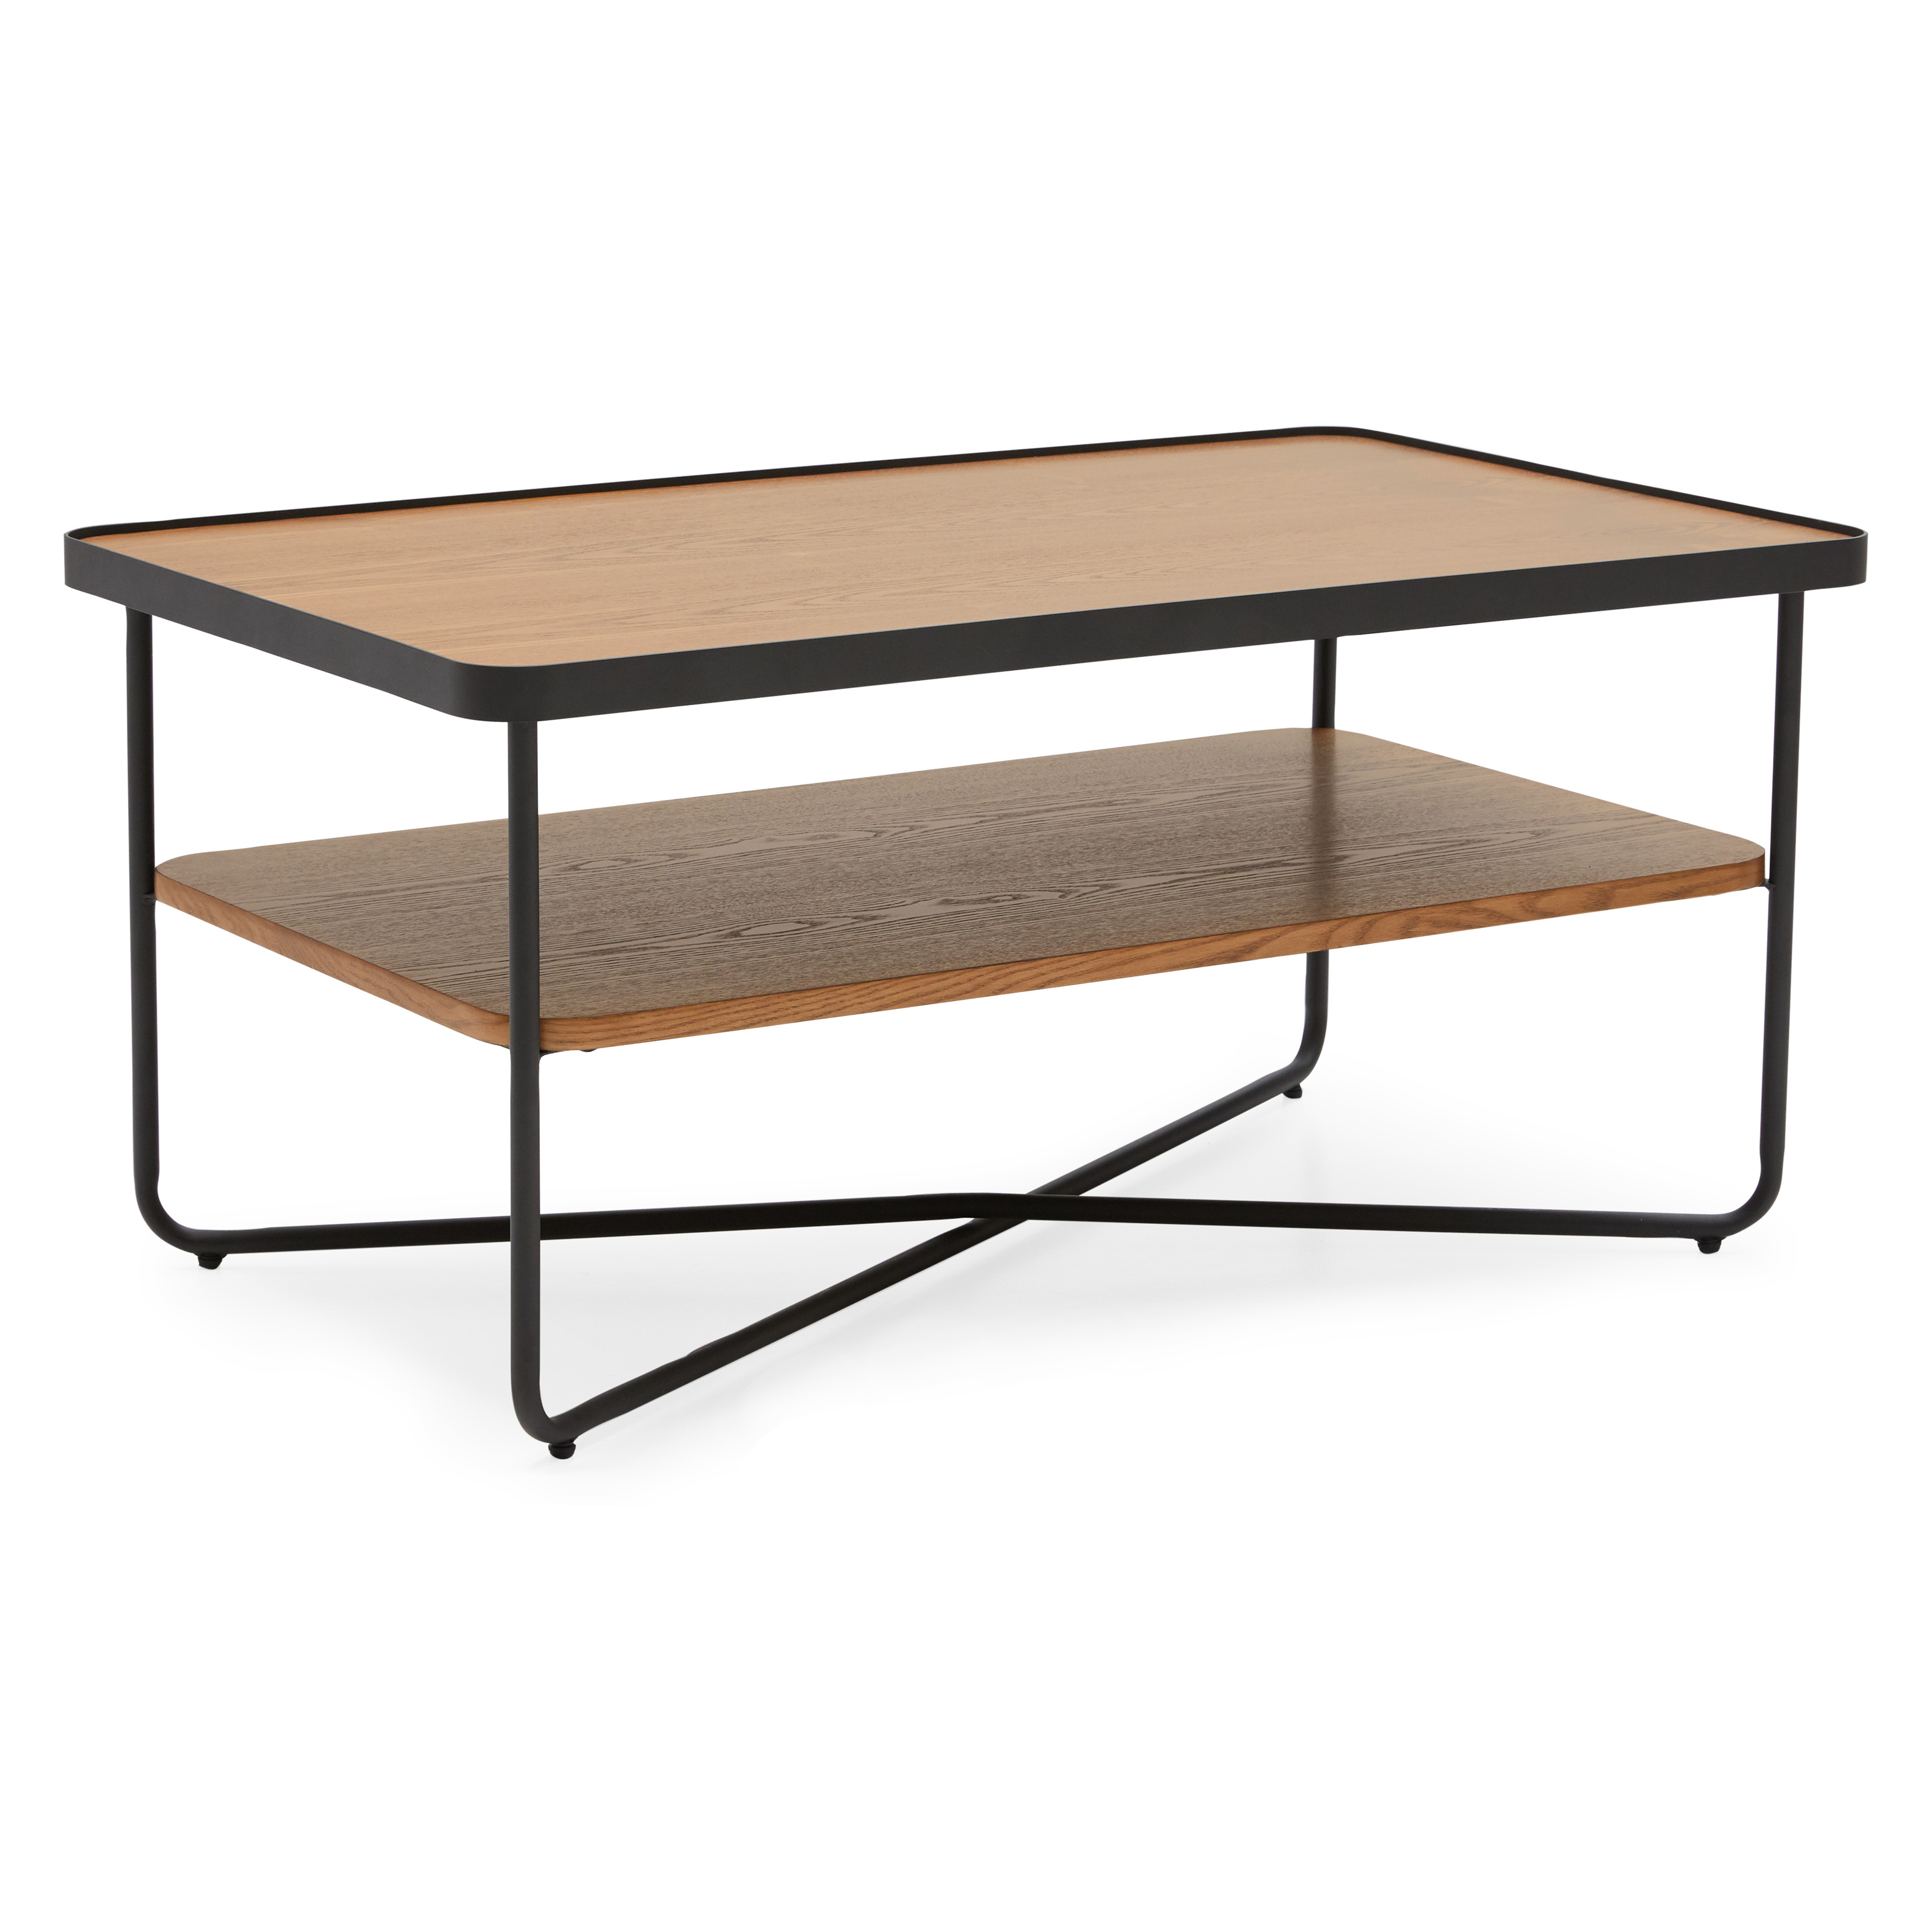 MoDRN Industrial Callen Coffee Table - Walnut and Charcoal Gray - image 4 of 12